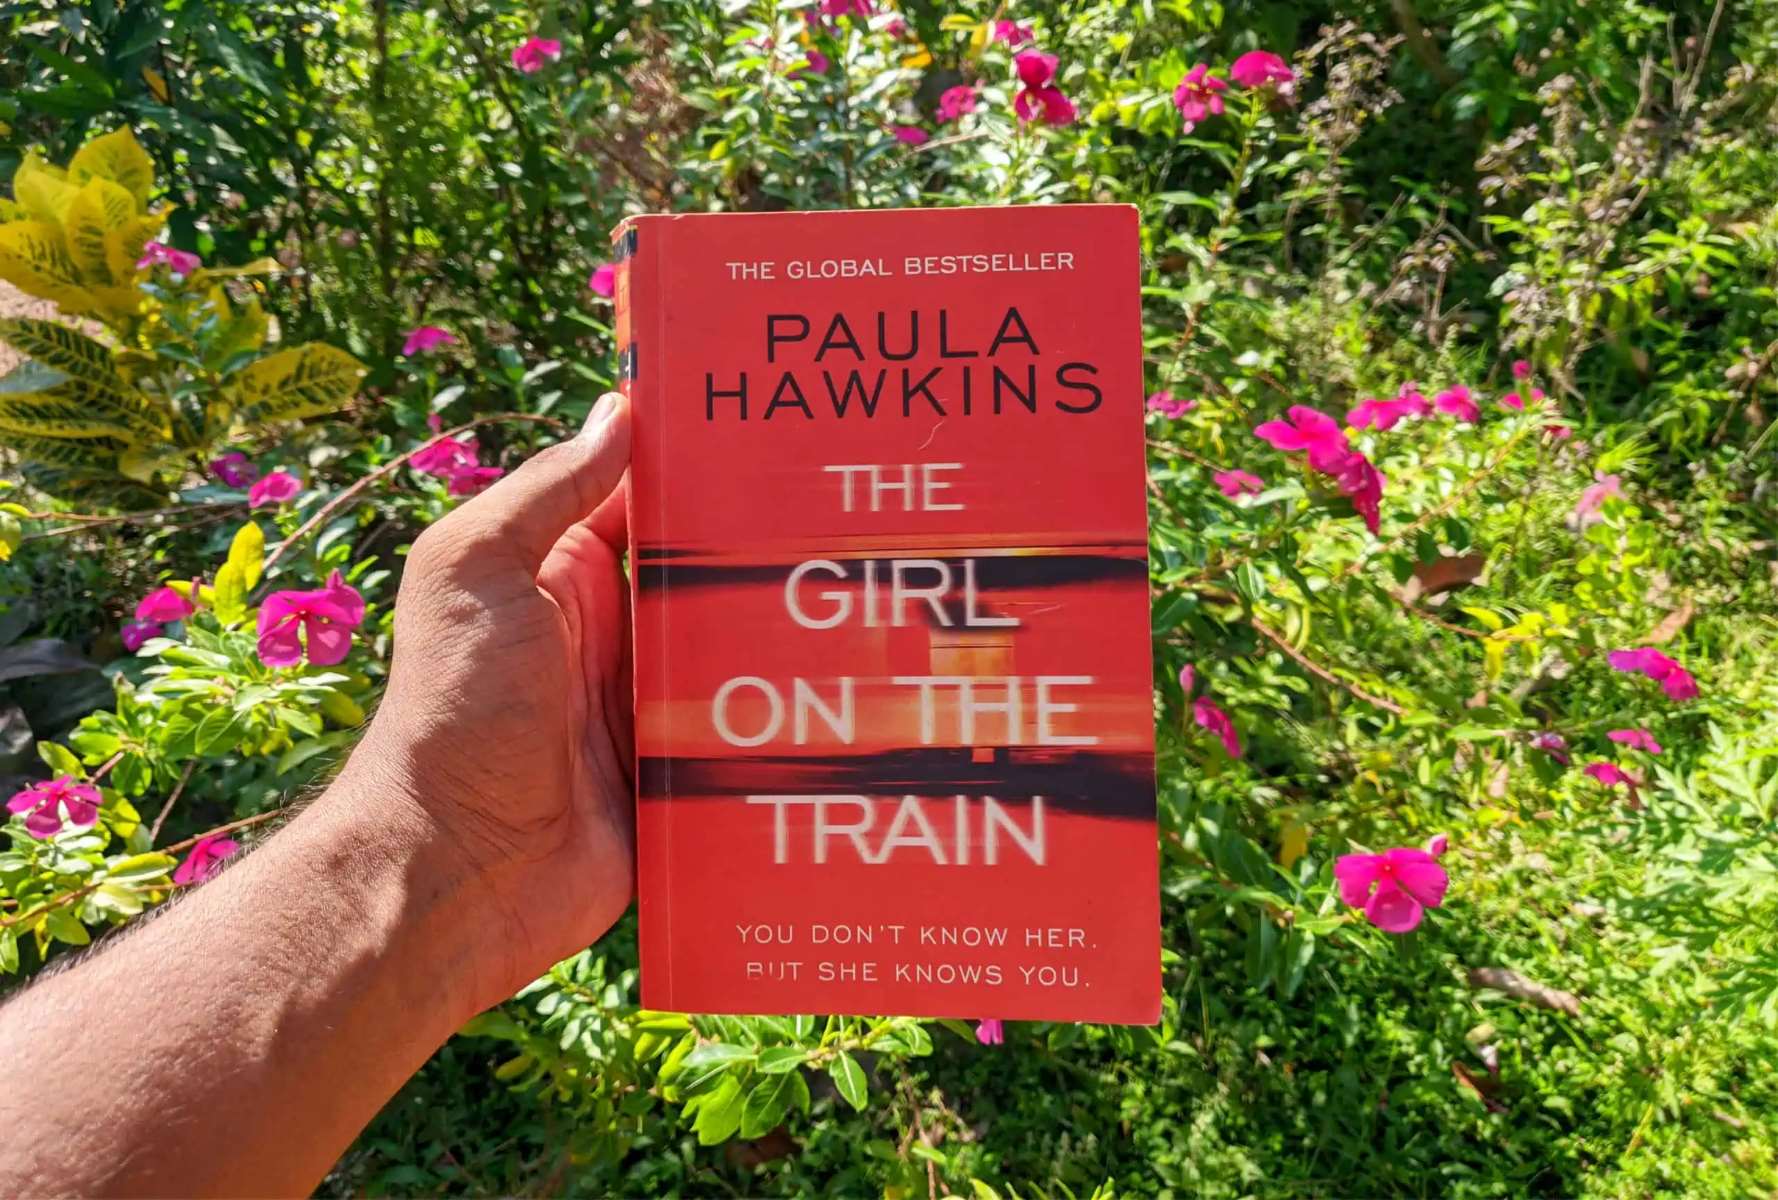 13-captivating-facts-about-the-girl-on-the-train-paula-hawkins